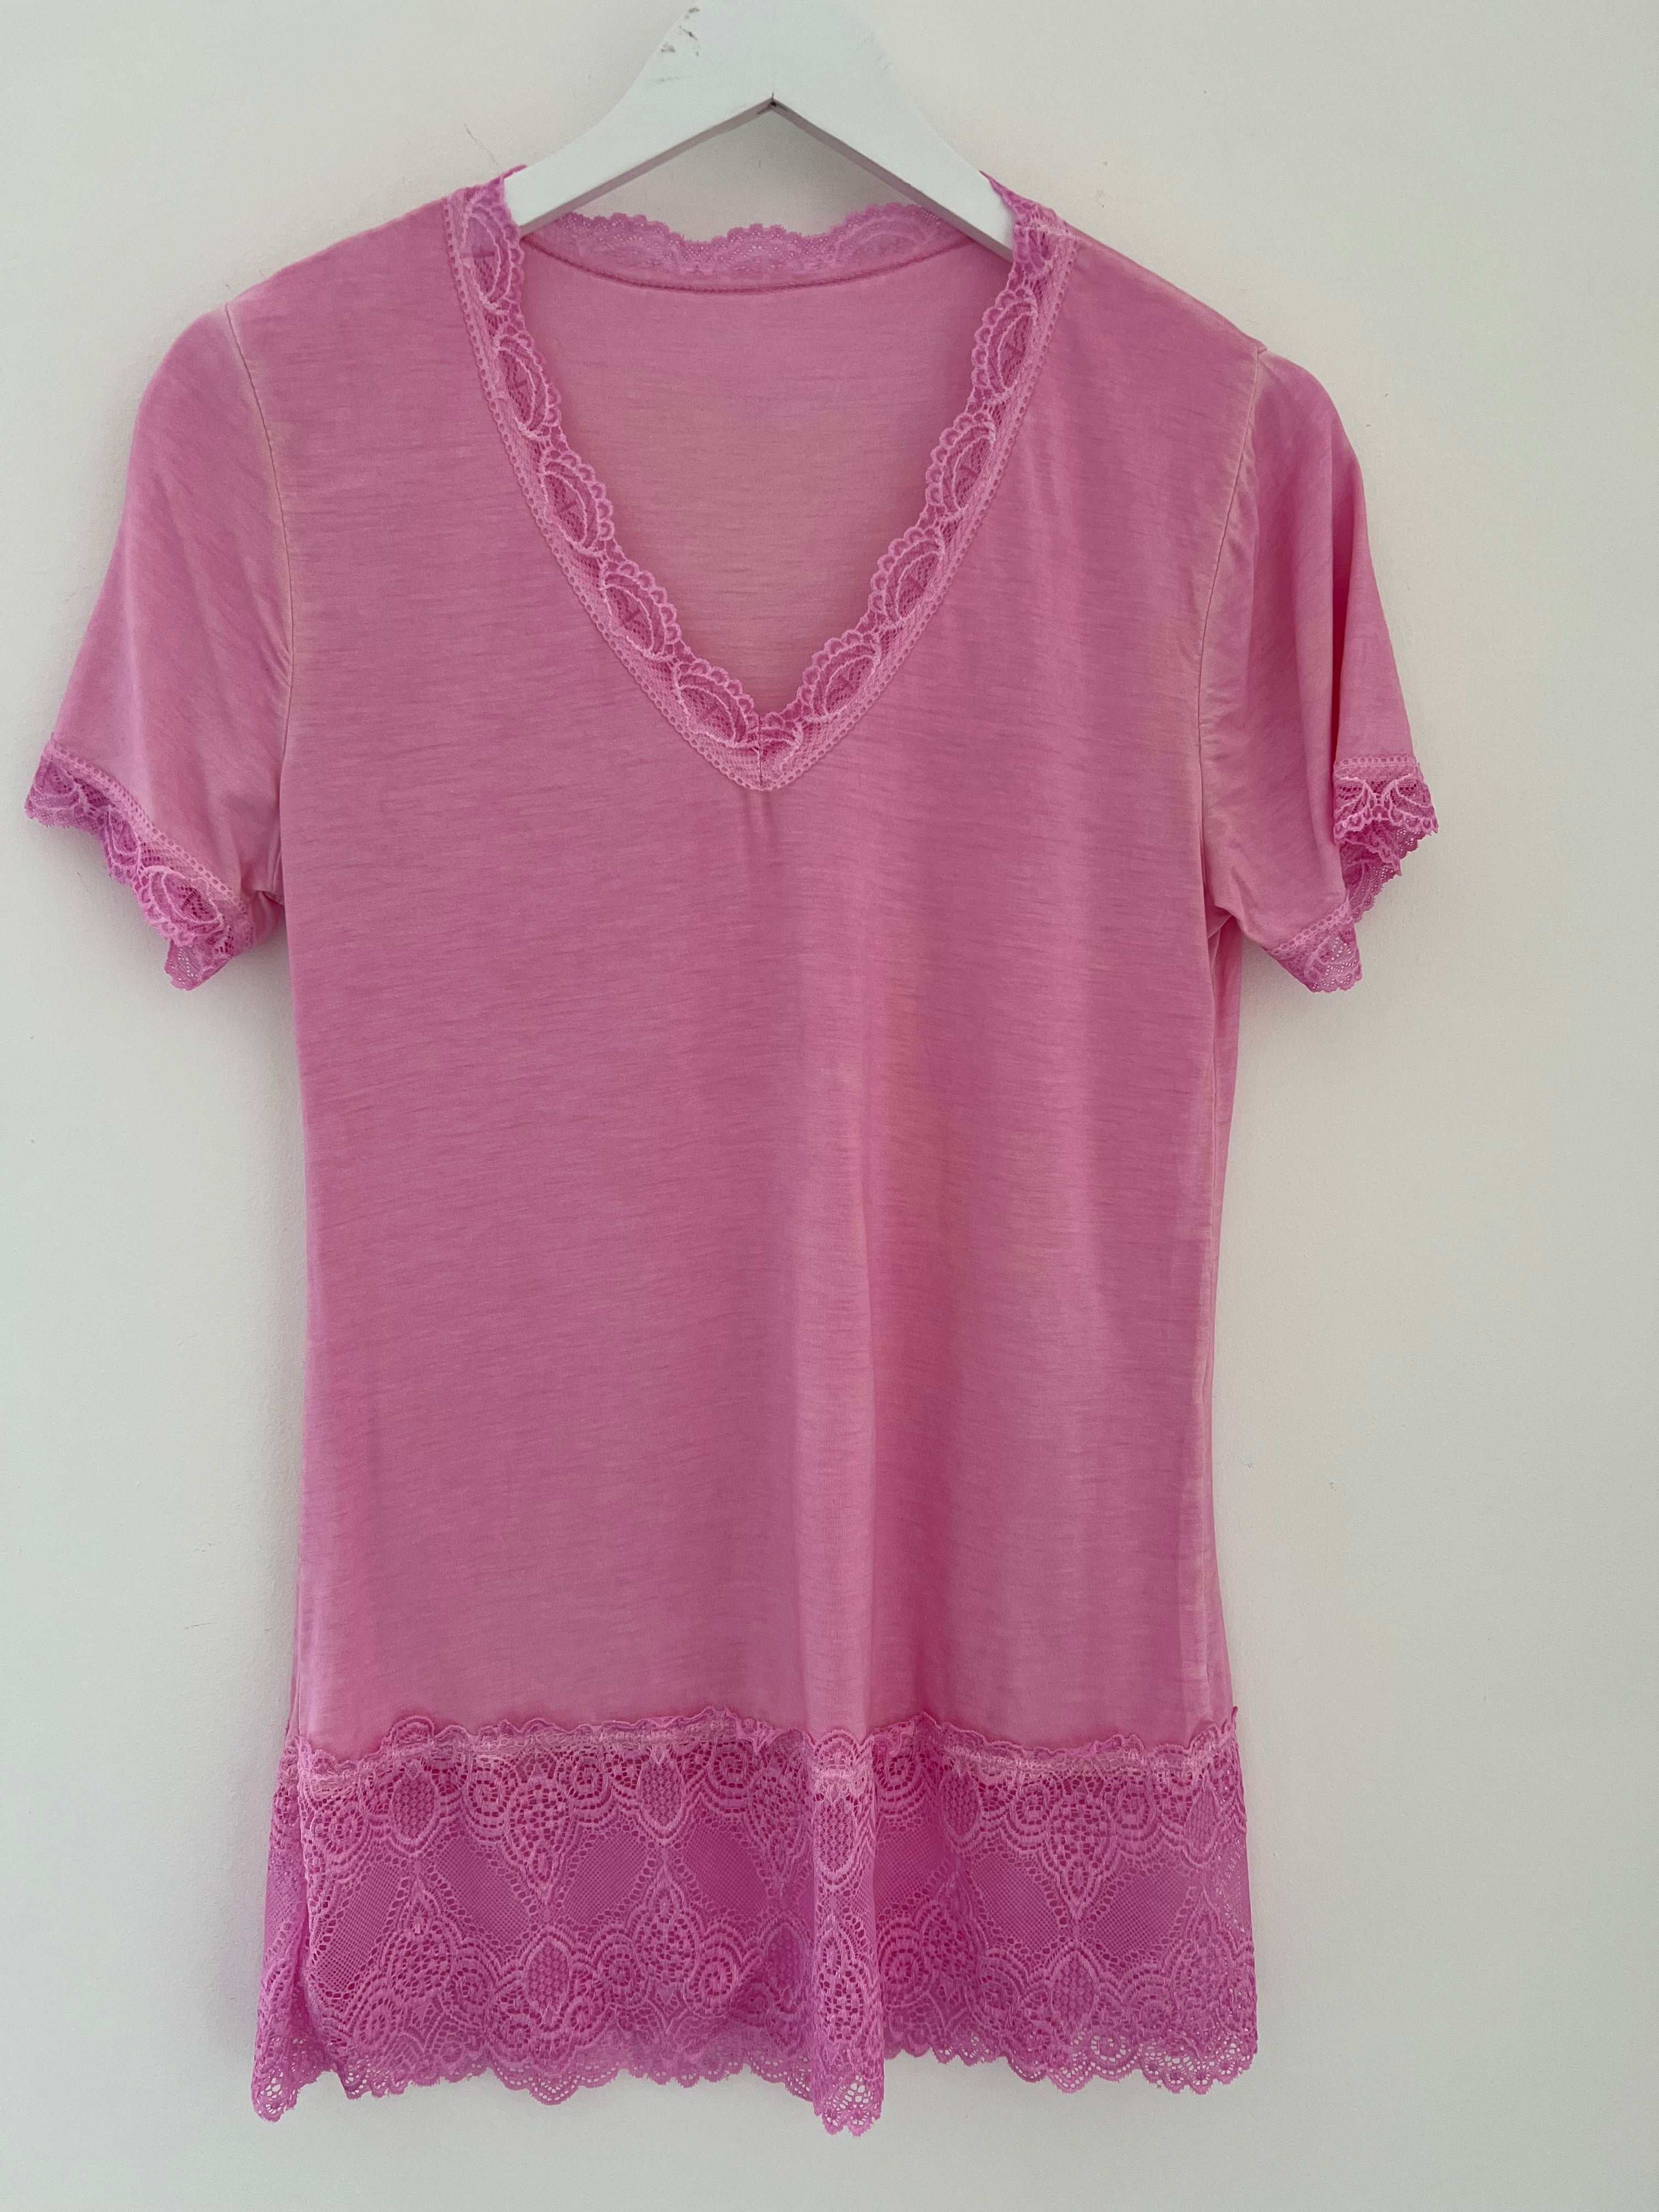 Short Sleeve Luxe Base Top in Pink